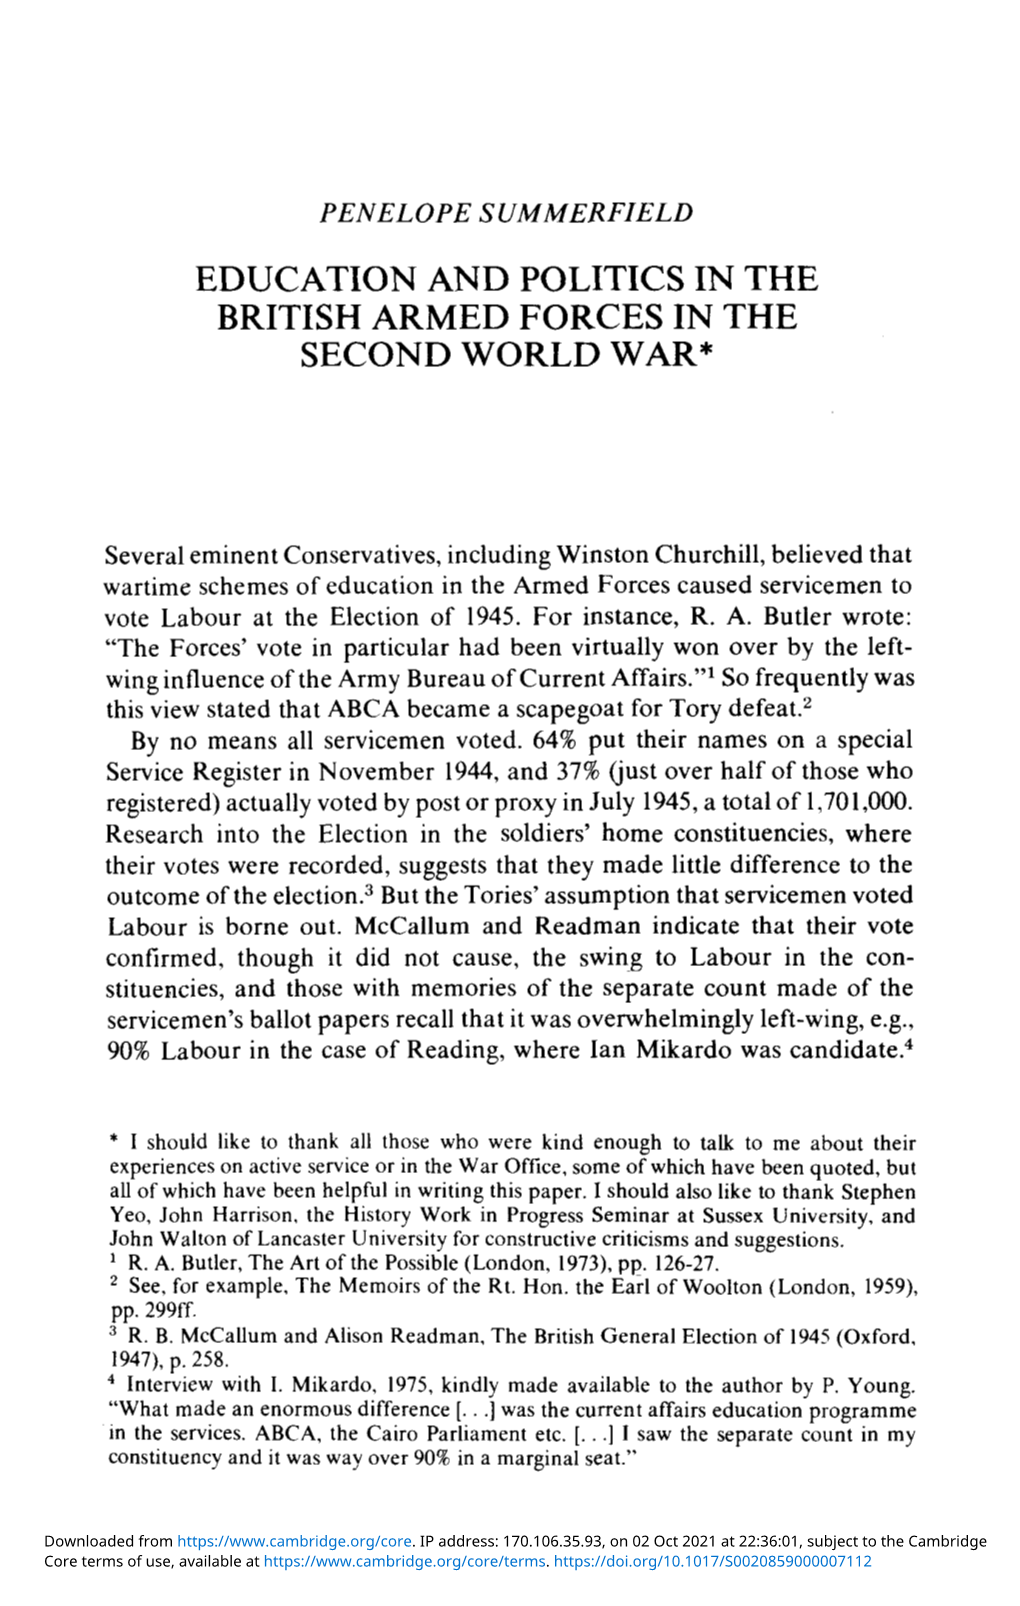 Education and Politics in the British Armed Forces in the Second World War*